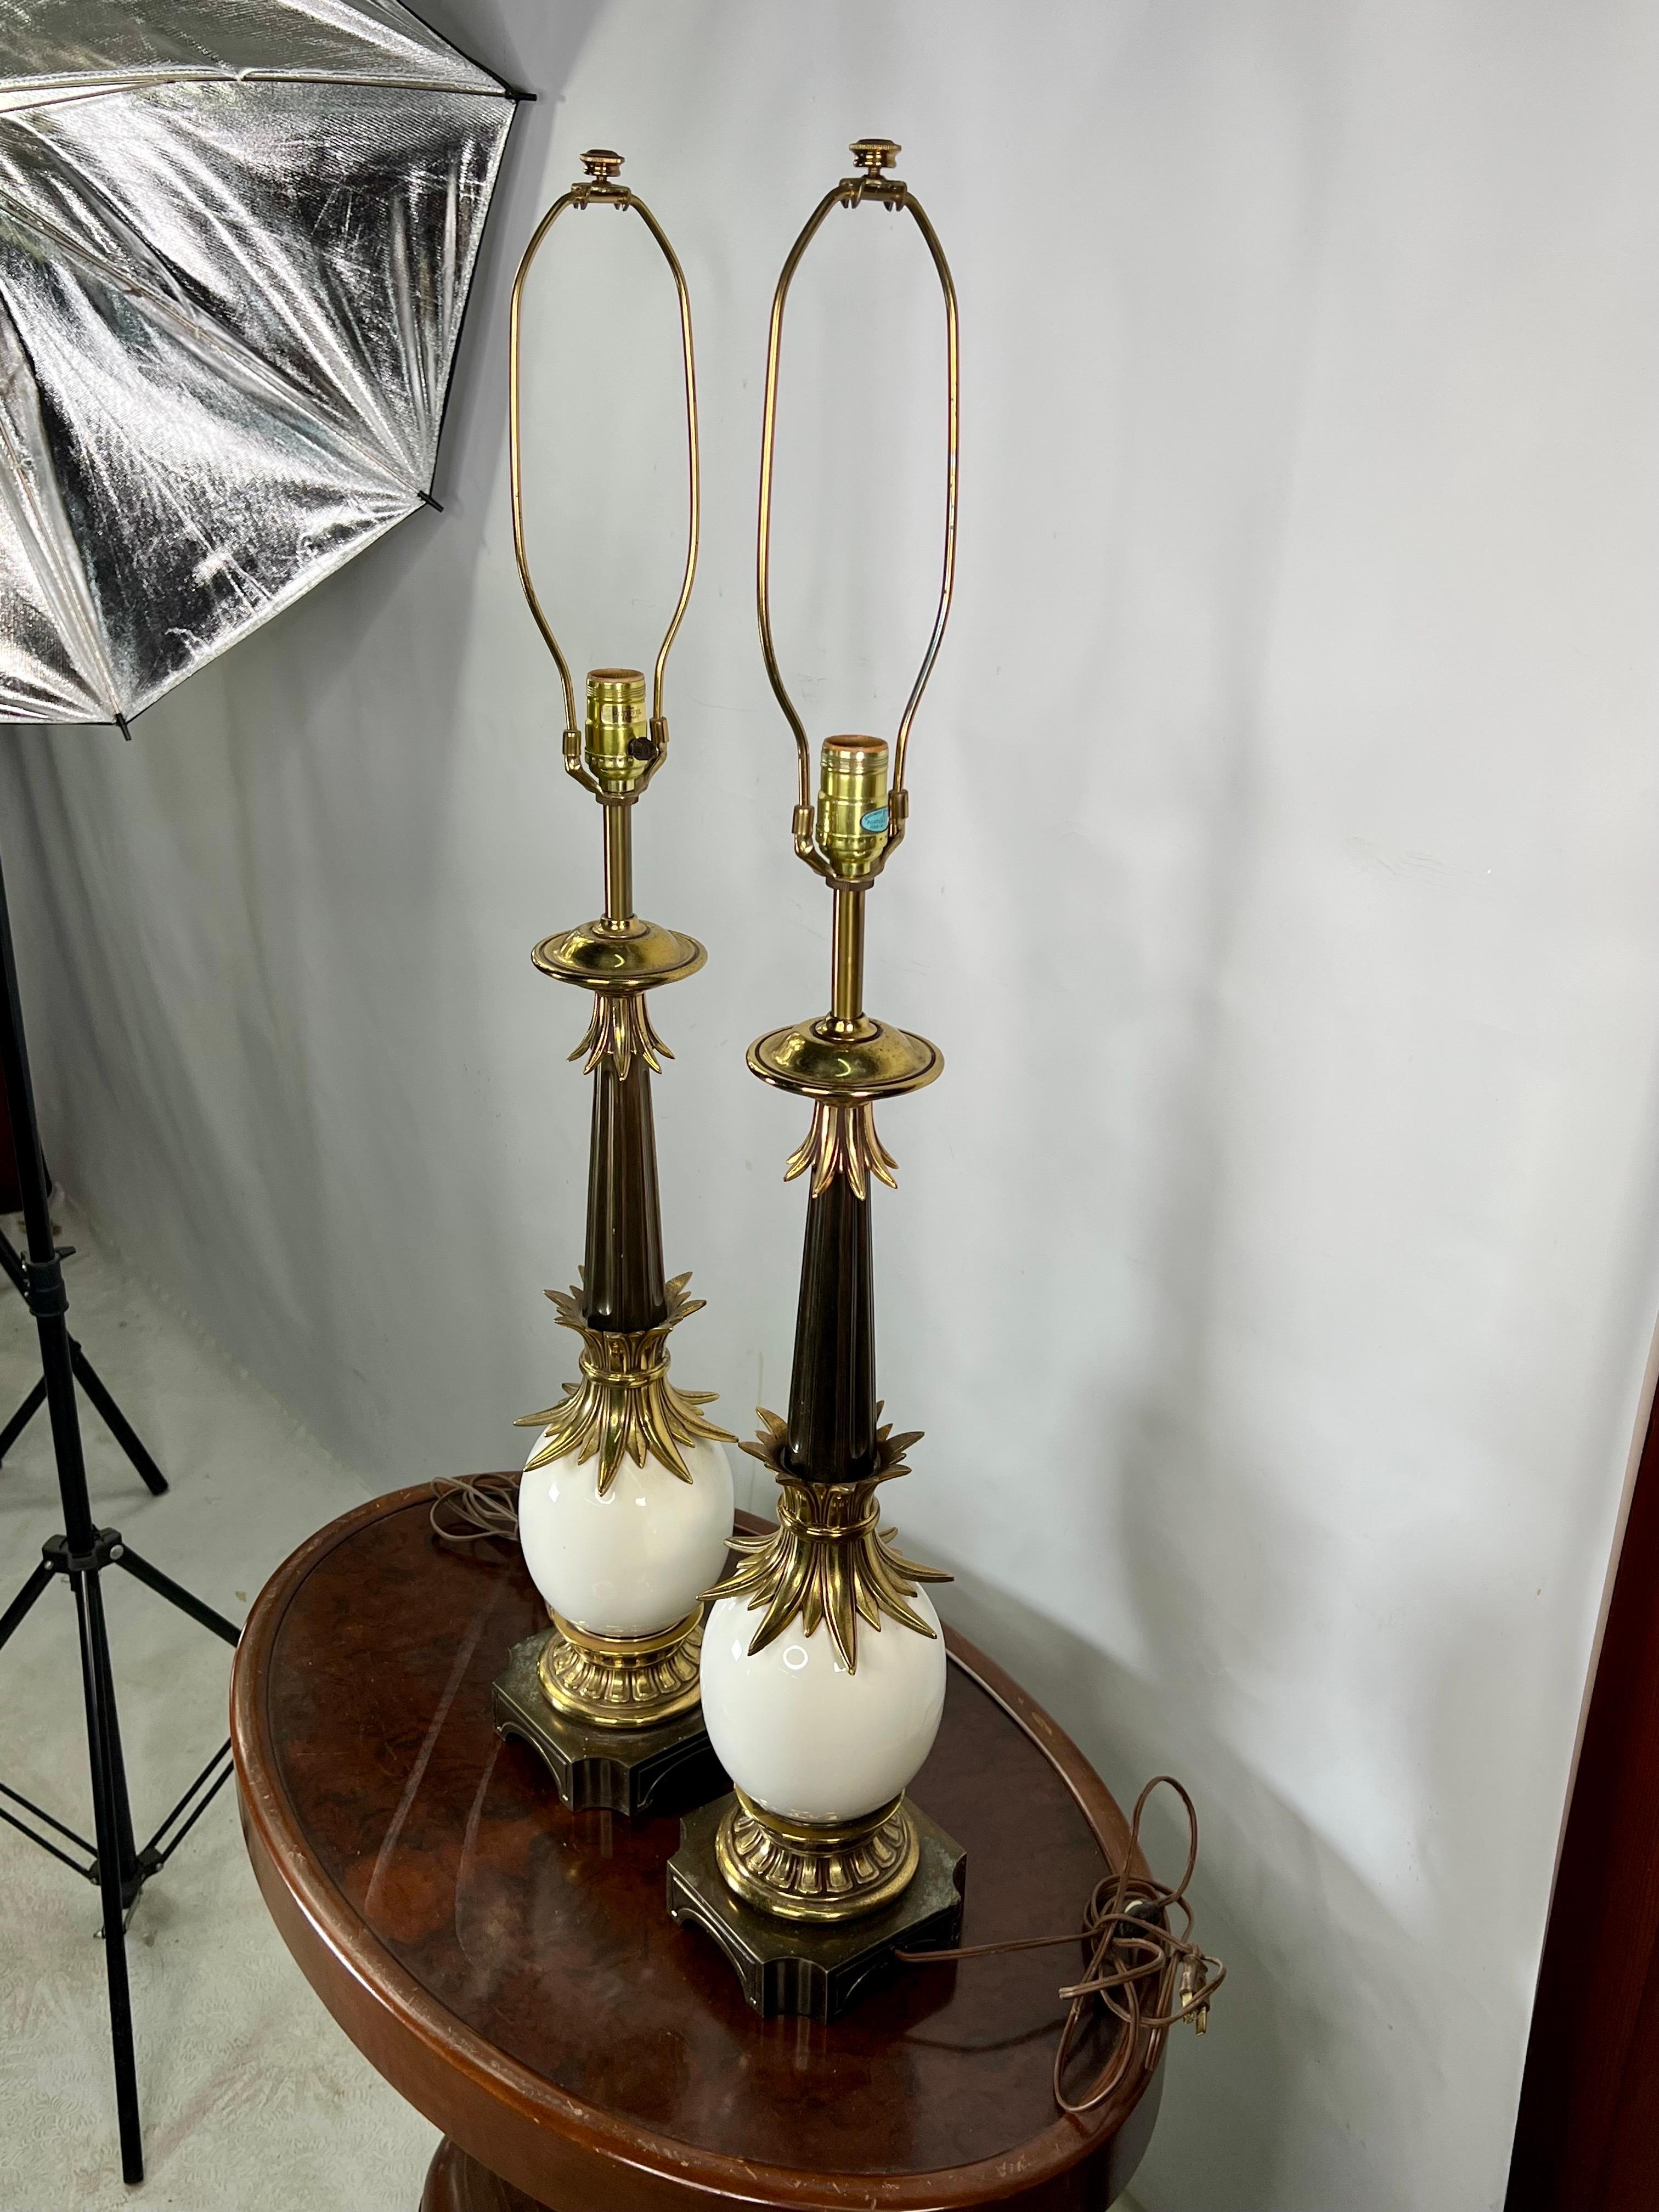 For sale is this pair of vintage Stiffel table lamps. The lamps are both working.